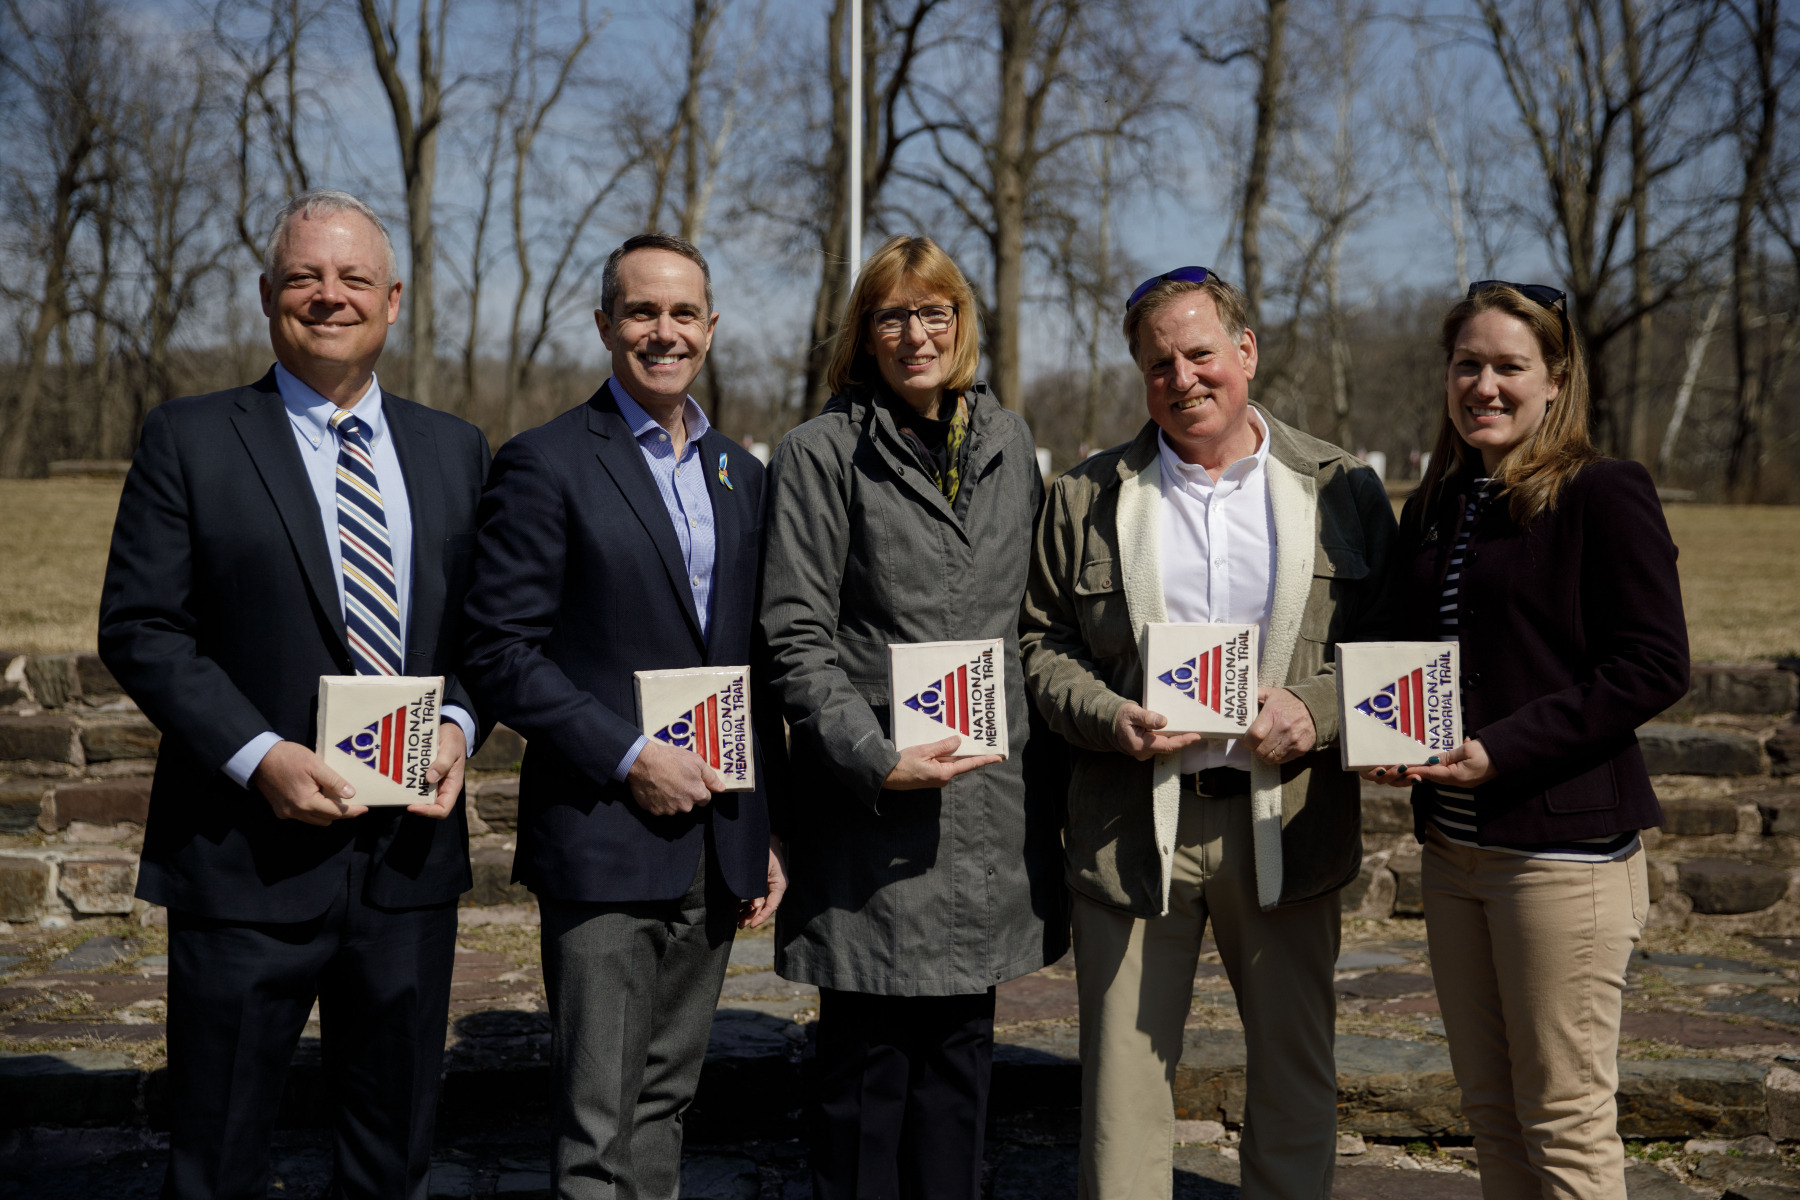 March 11, 2022: 9/11 Memorial Trail State Greenway Dedication with DCNR Secretary Dunn